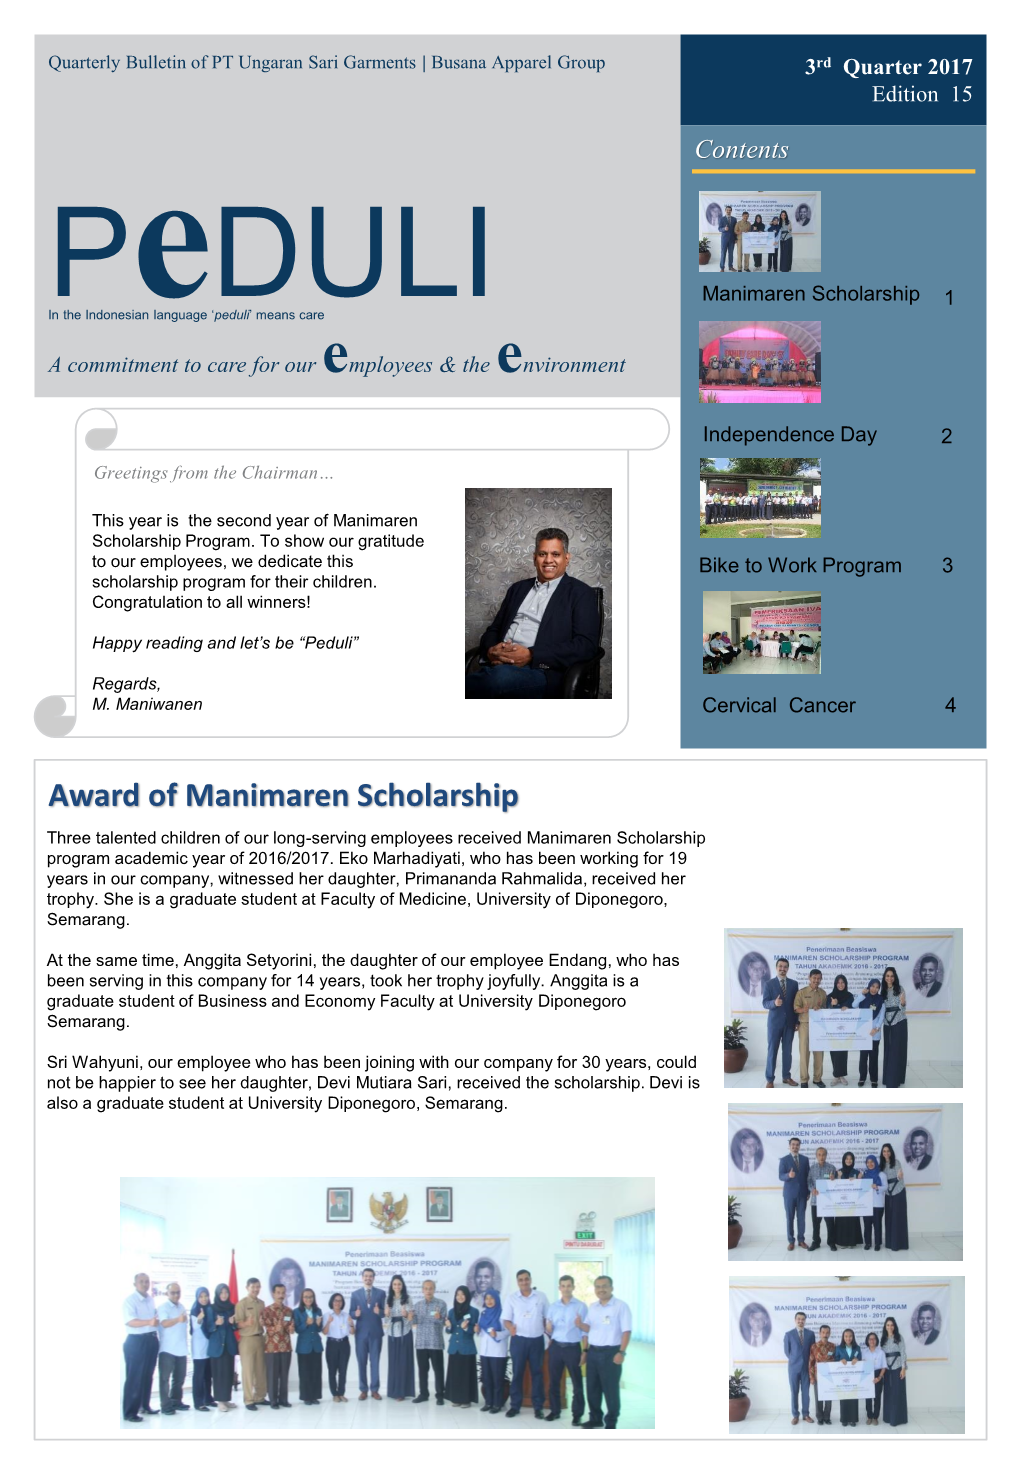 Peduli’ Means Care a Commitment to Care for Our Employees & the Environment